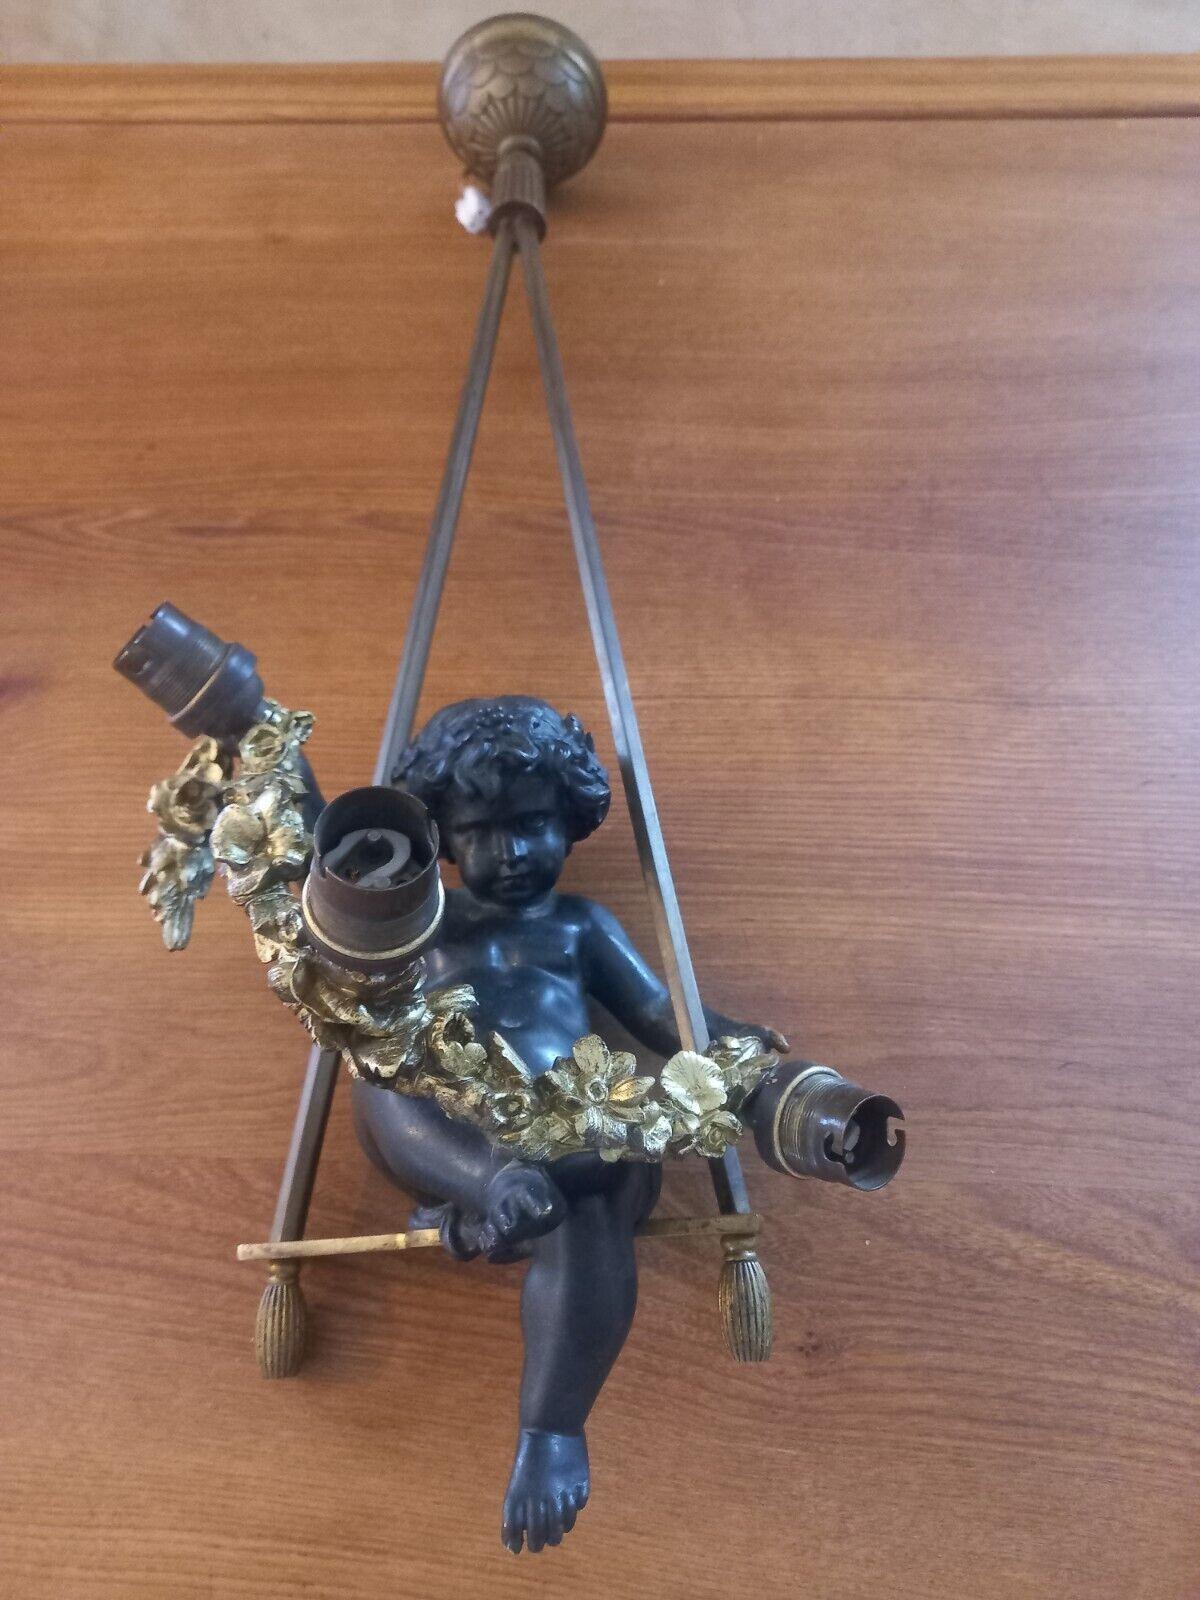 Stunning and Very High Quality. 19thc French Napoleon Gilt & Patinated Bronze Cherub Baby on His Swing and Carrying a Garland Chandelier. I cannot emphasize the superb quality of the casting. 3 light. This is a very special chandelier.